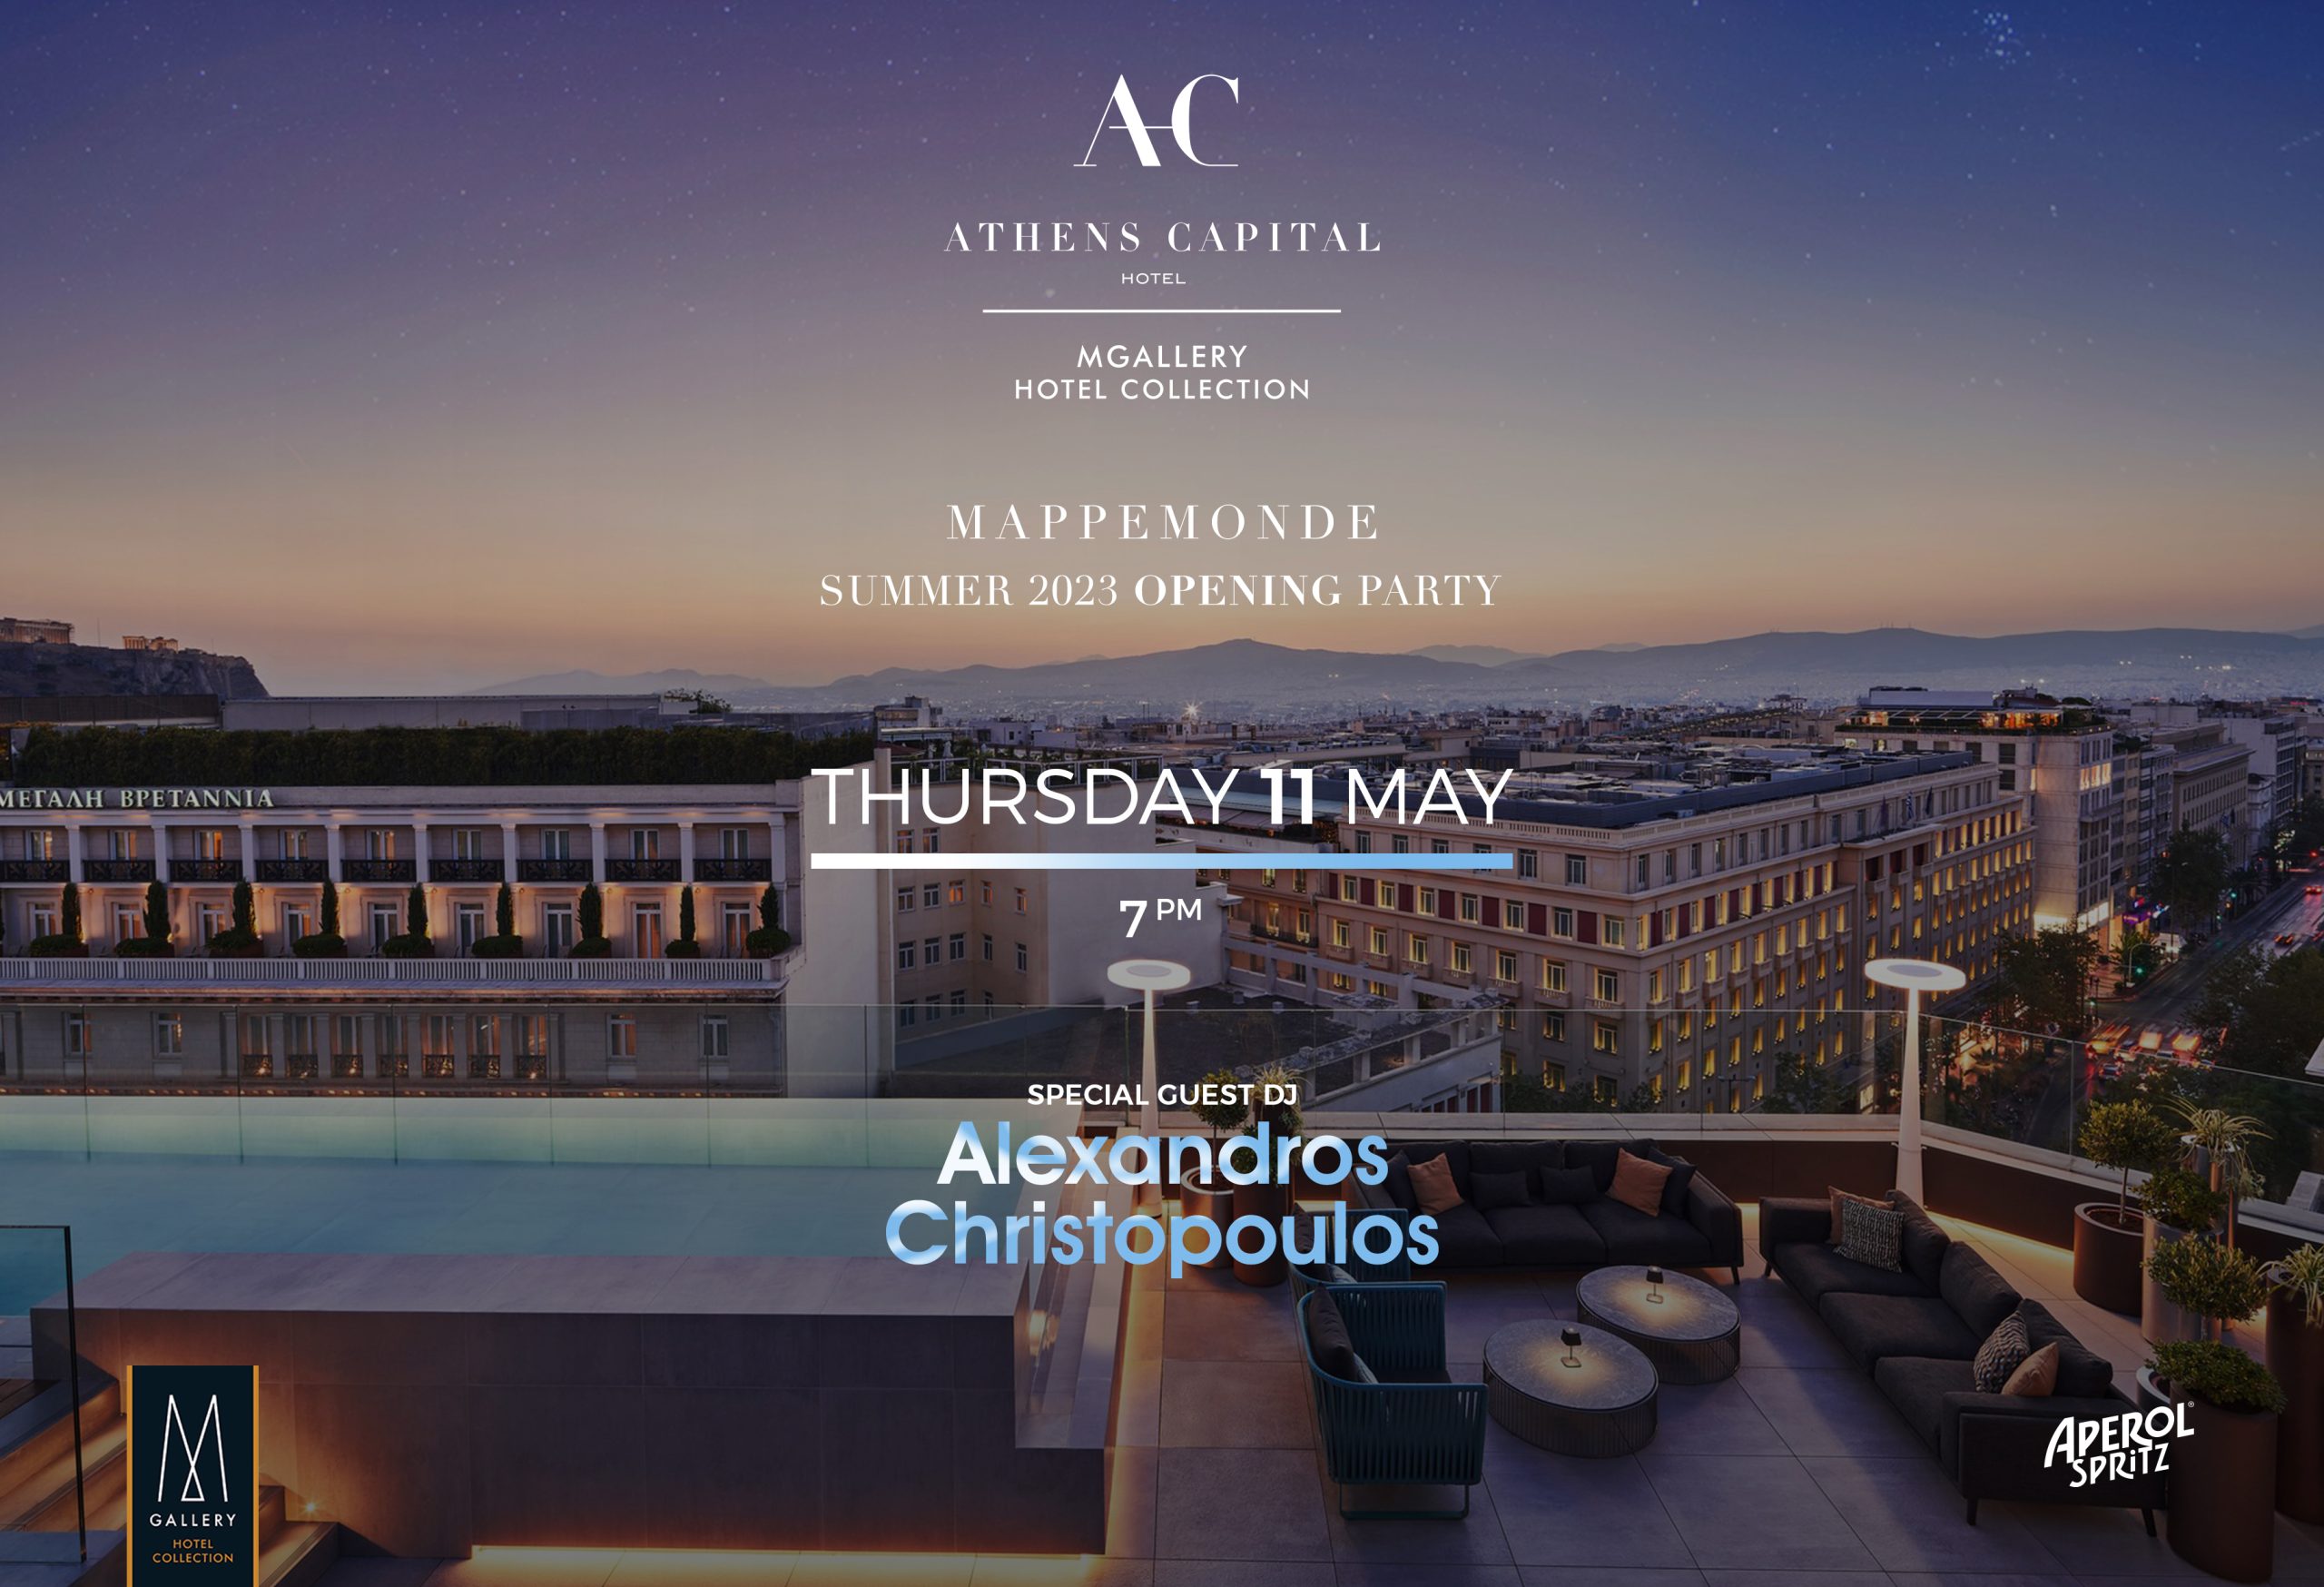 Mappemonde ★ Athens CAPITAL Hotel ★ Summer OPENING Party